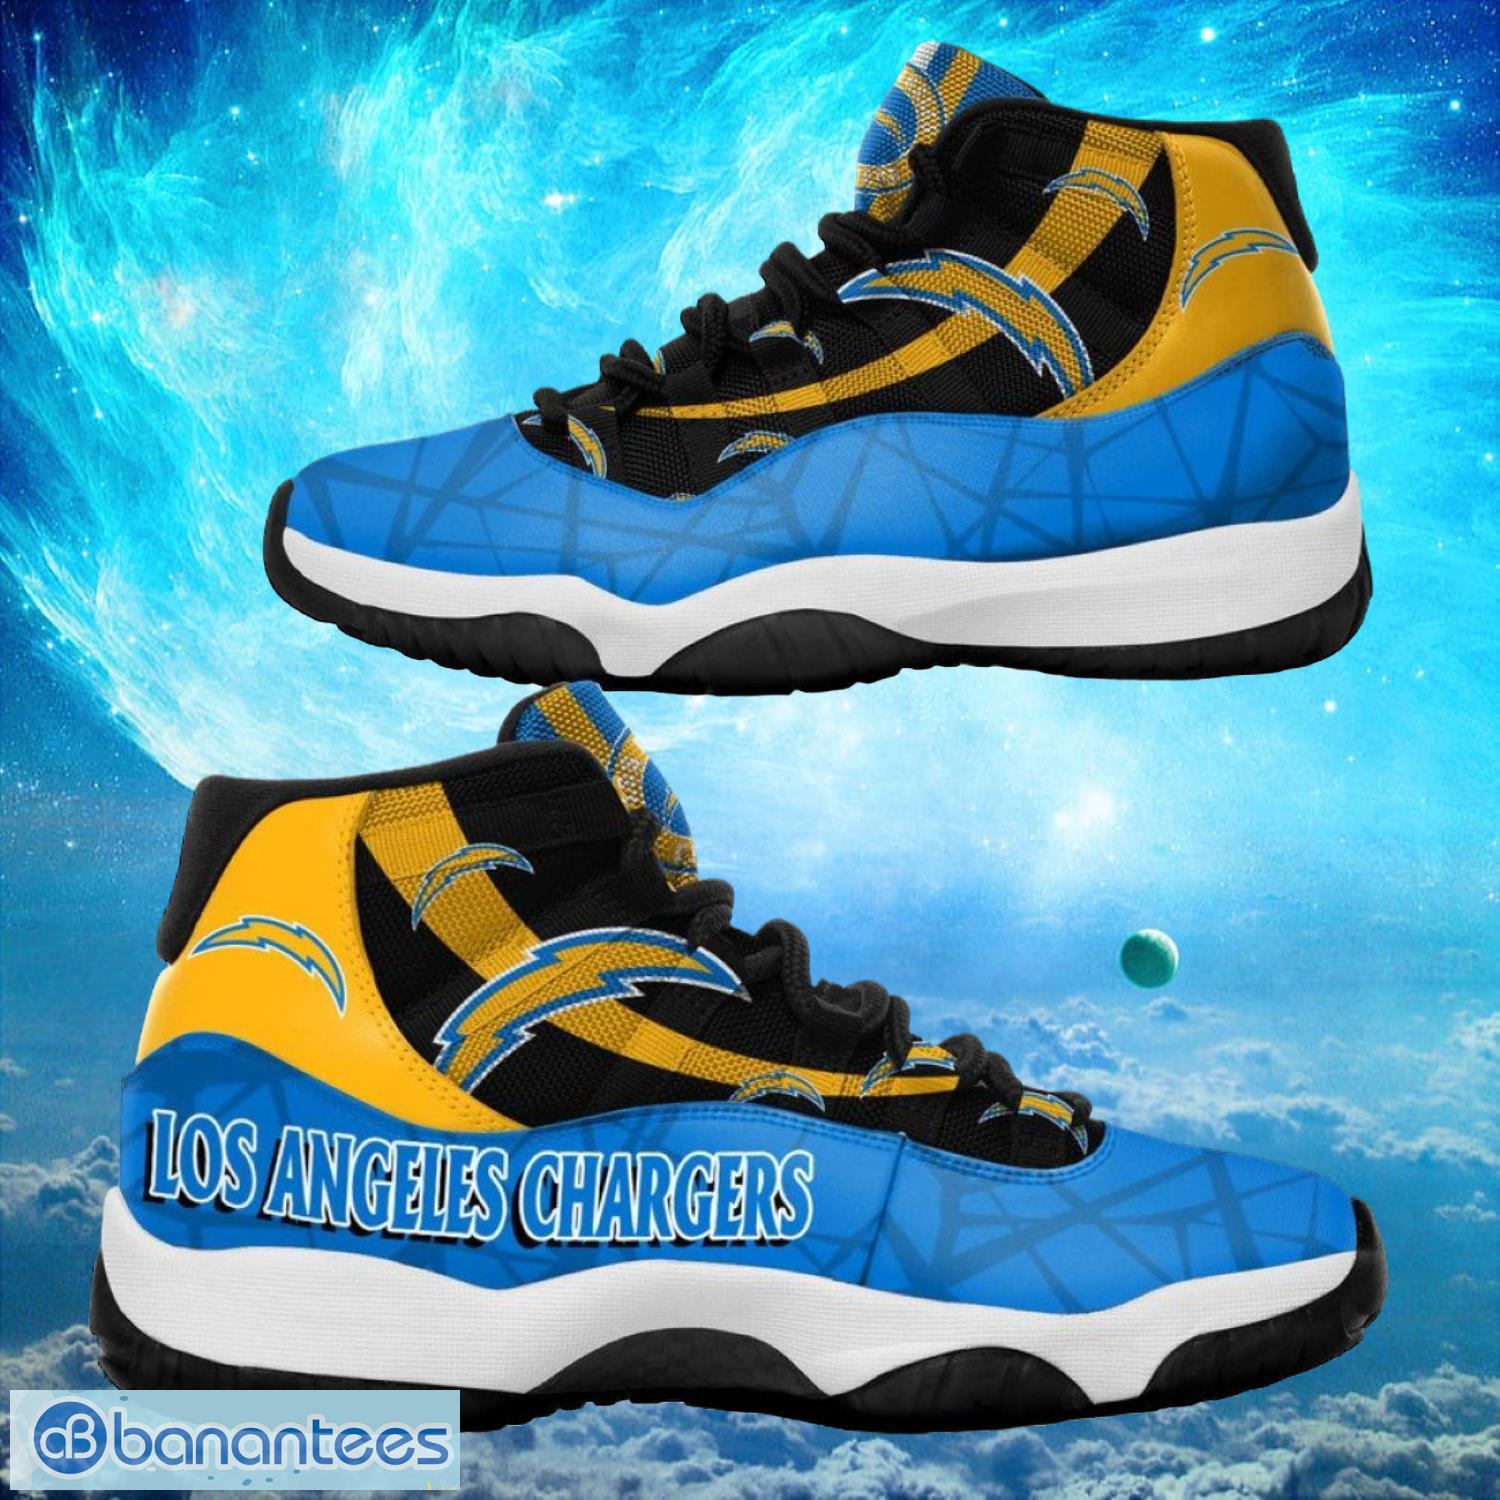 Los Angeles Chargers NFL Air Jordan 11 Sneakers Shoes Gift For Fans Product Photo 1